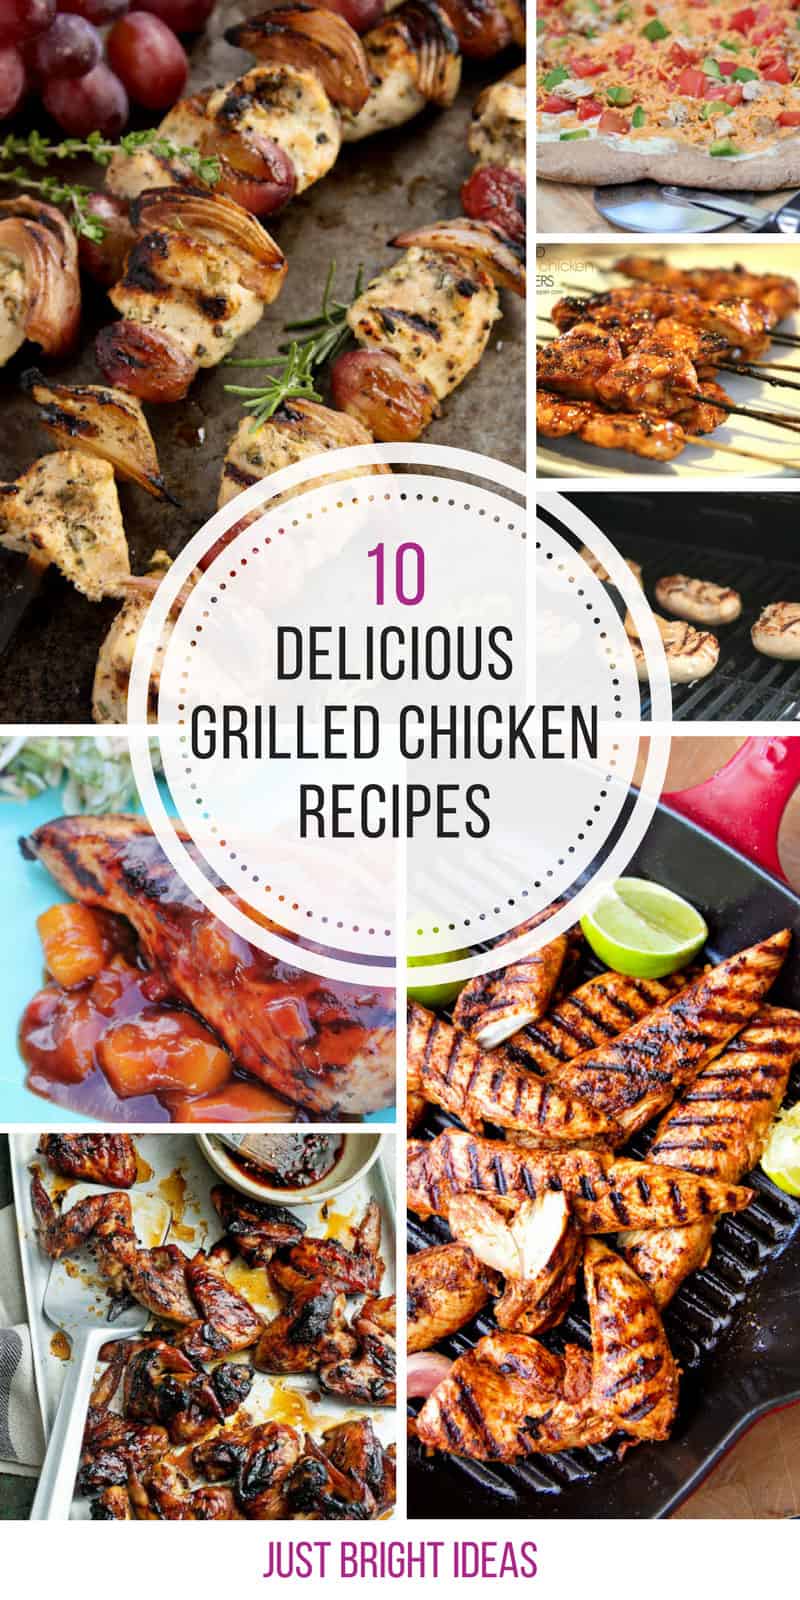 So many great chicken recipes for the grill this summer! Thanks for sharing!